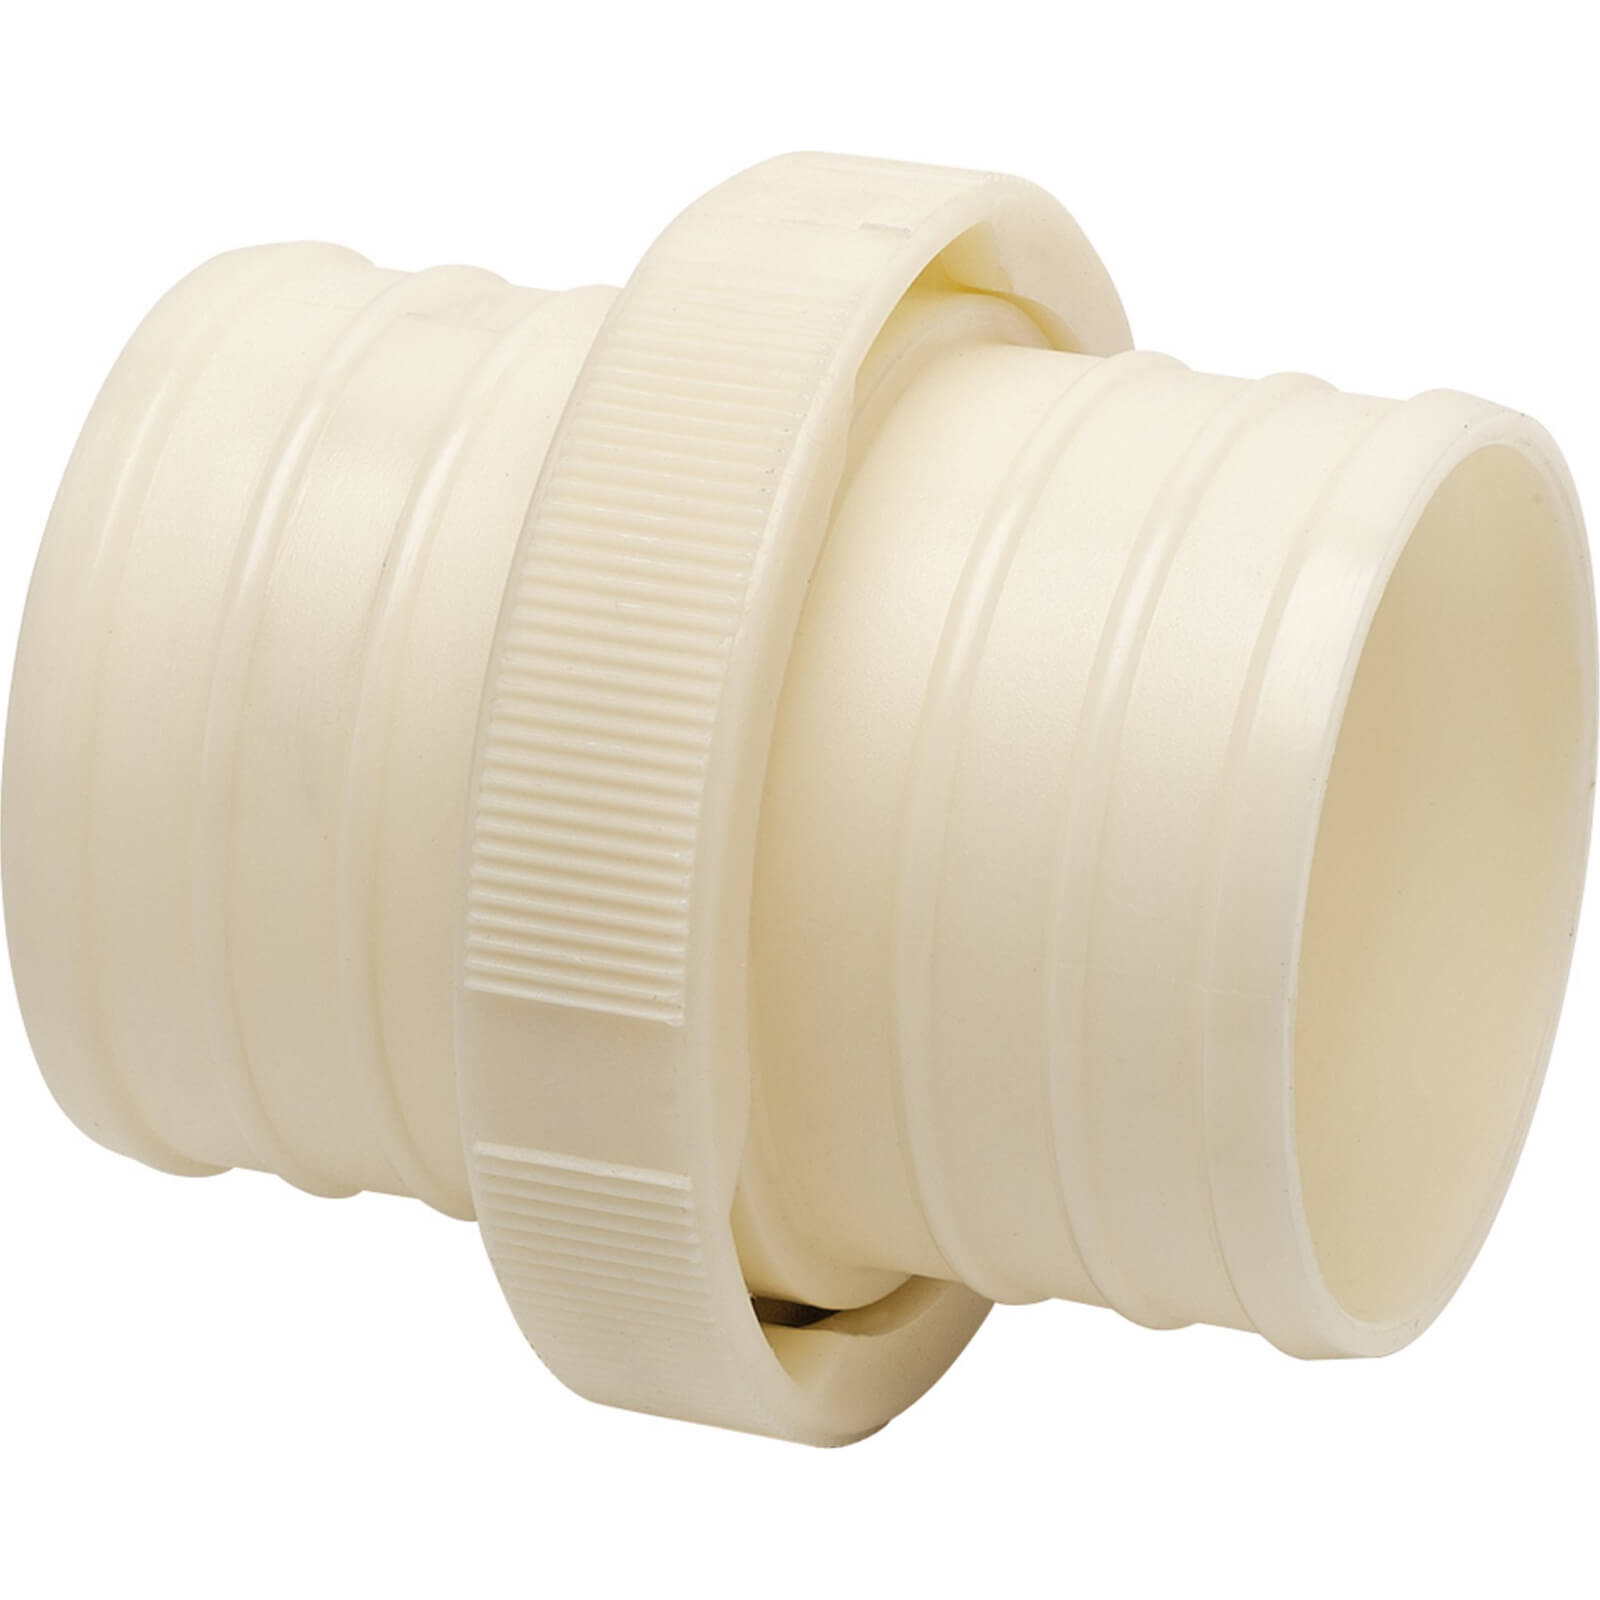 Photos - Other household chemicals Draper Lay Flat Hose Coupling Adaptor or Connector 2" / 50mm ASH2 